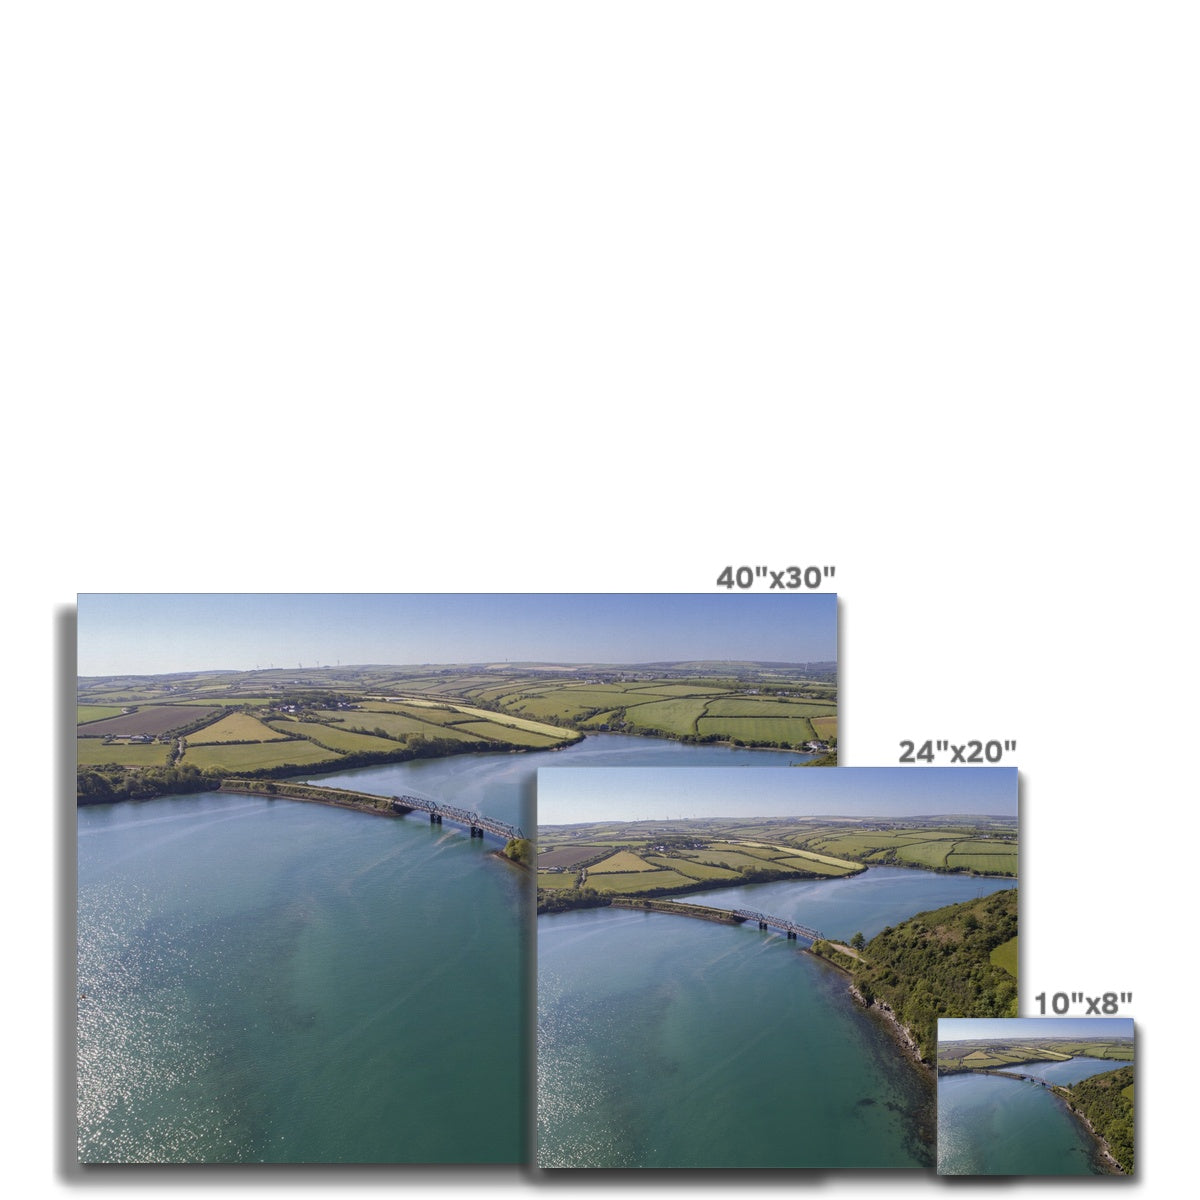 padstow canvas sizes